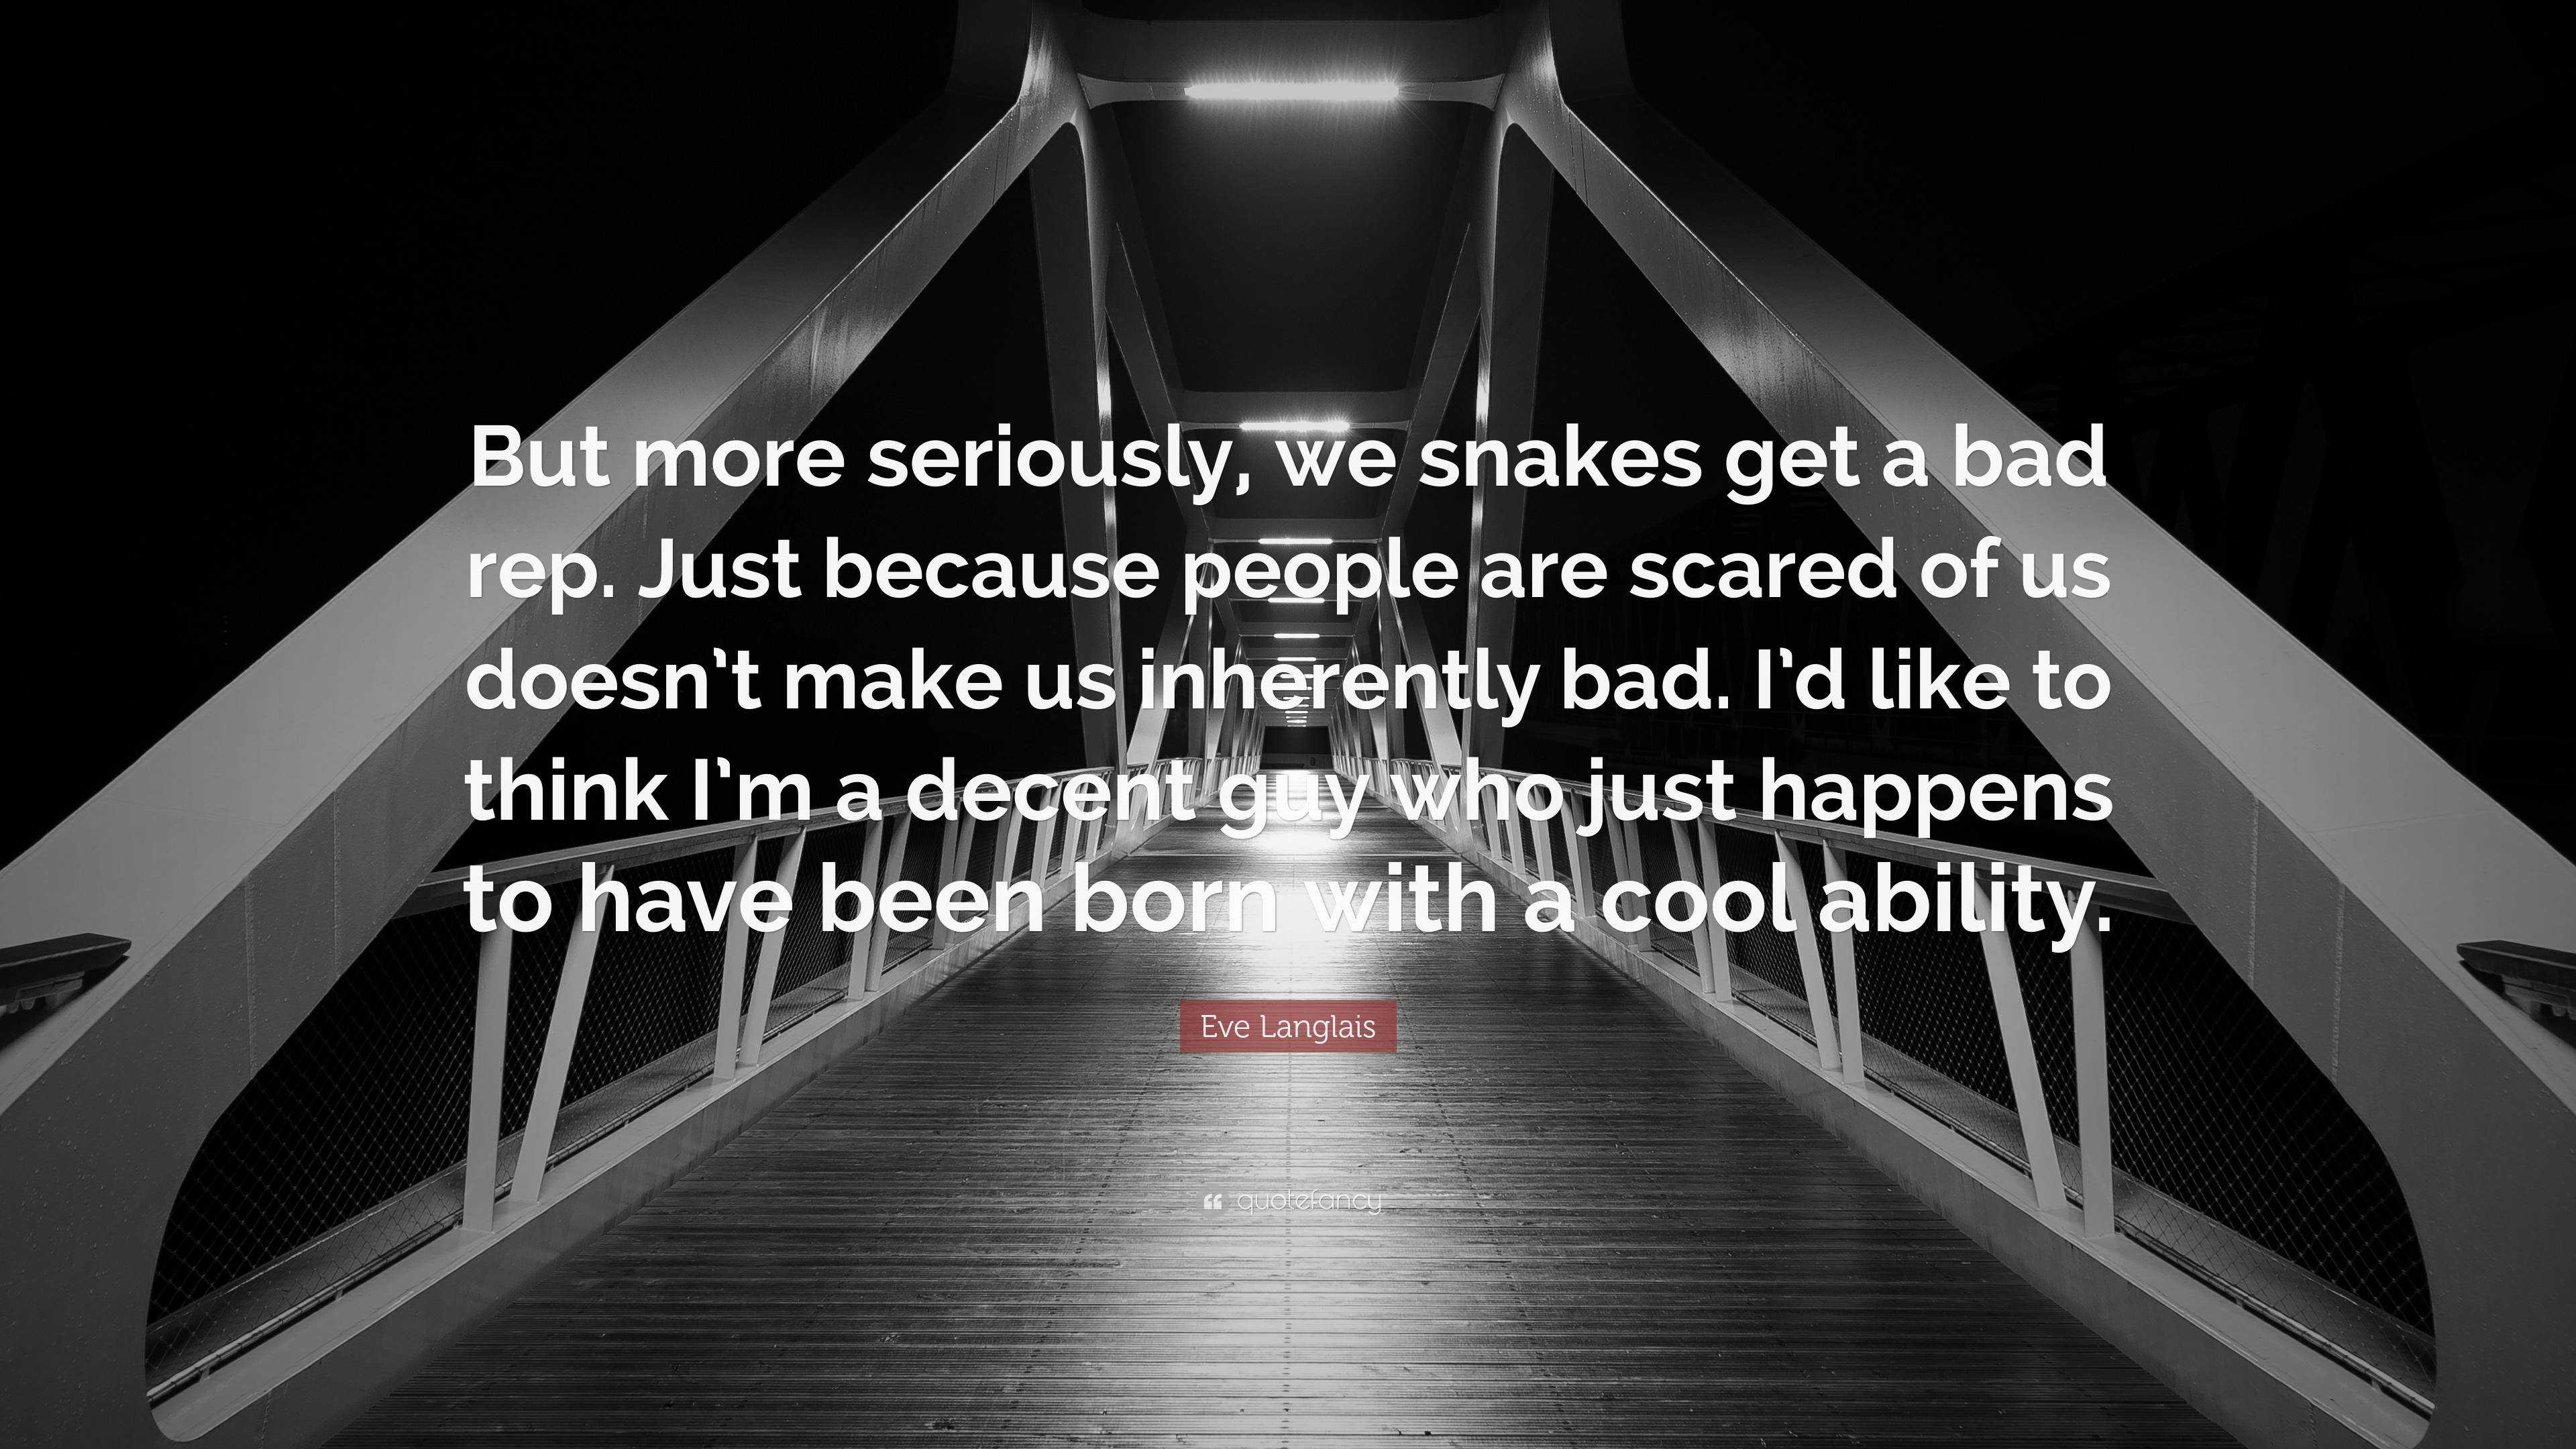 Eve Langlais Quote: “But more seriously, we snakes get a bad rep. Just ...